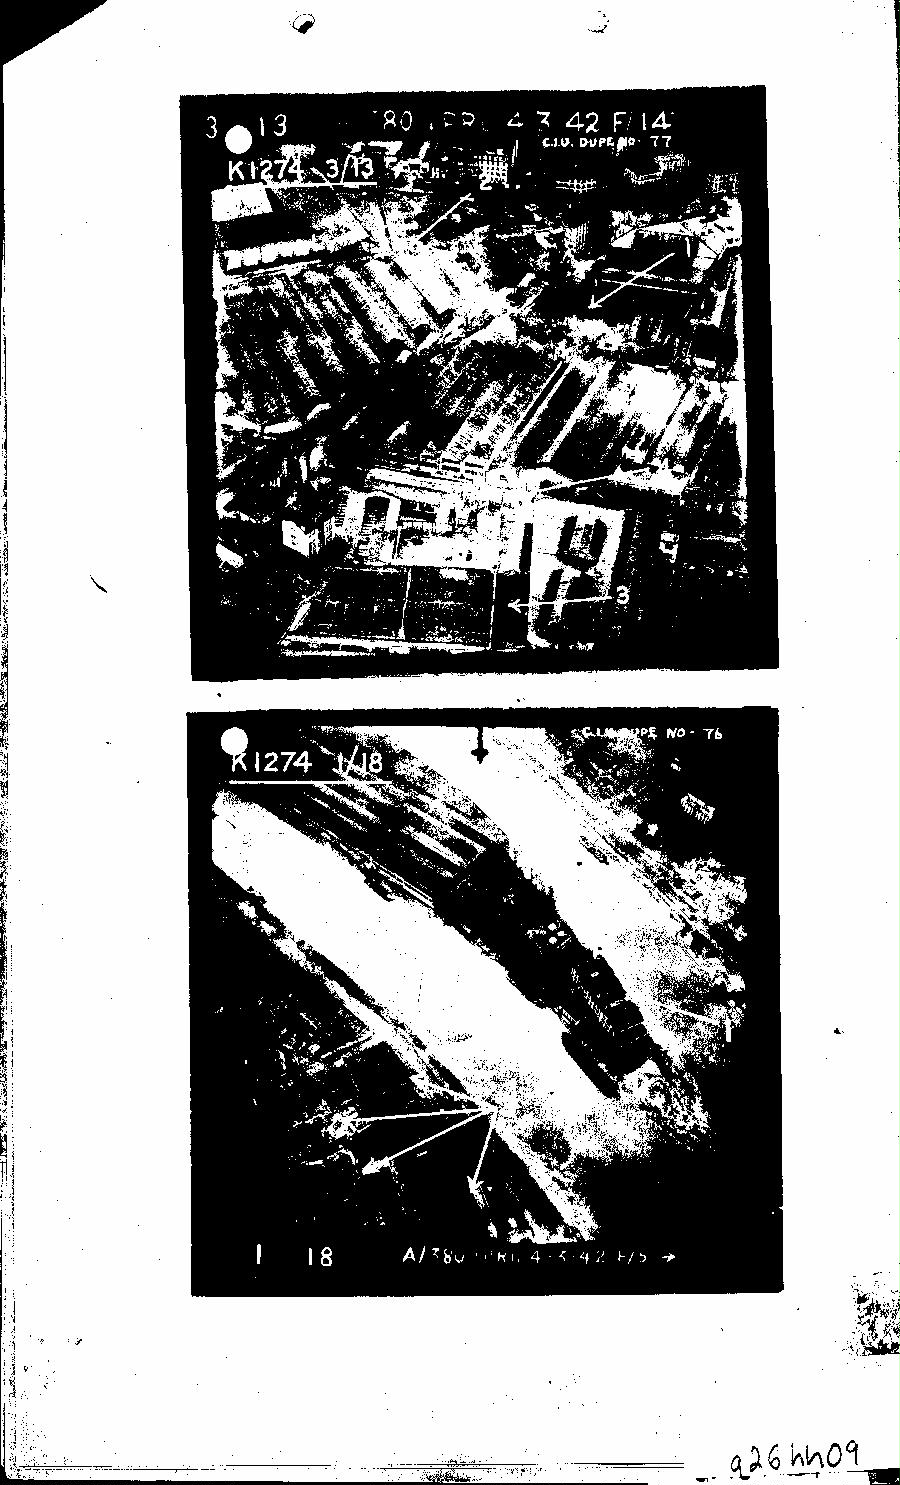 [a26hh09.jpg] - DAMAGED PLOTS  IN FRANCE AFTER THE ATTACK ON 3/4 MARCH 1942  PAGE - 9